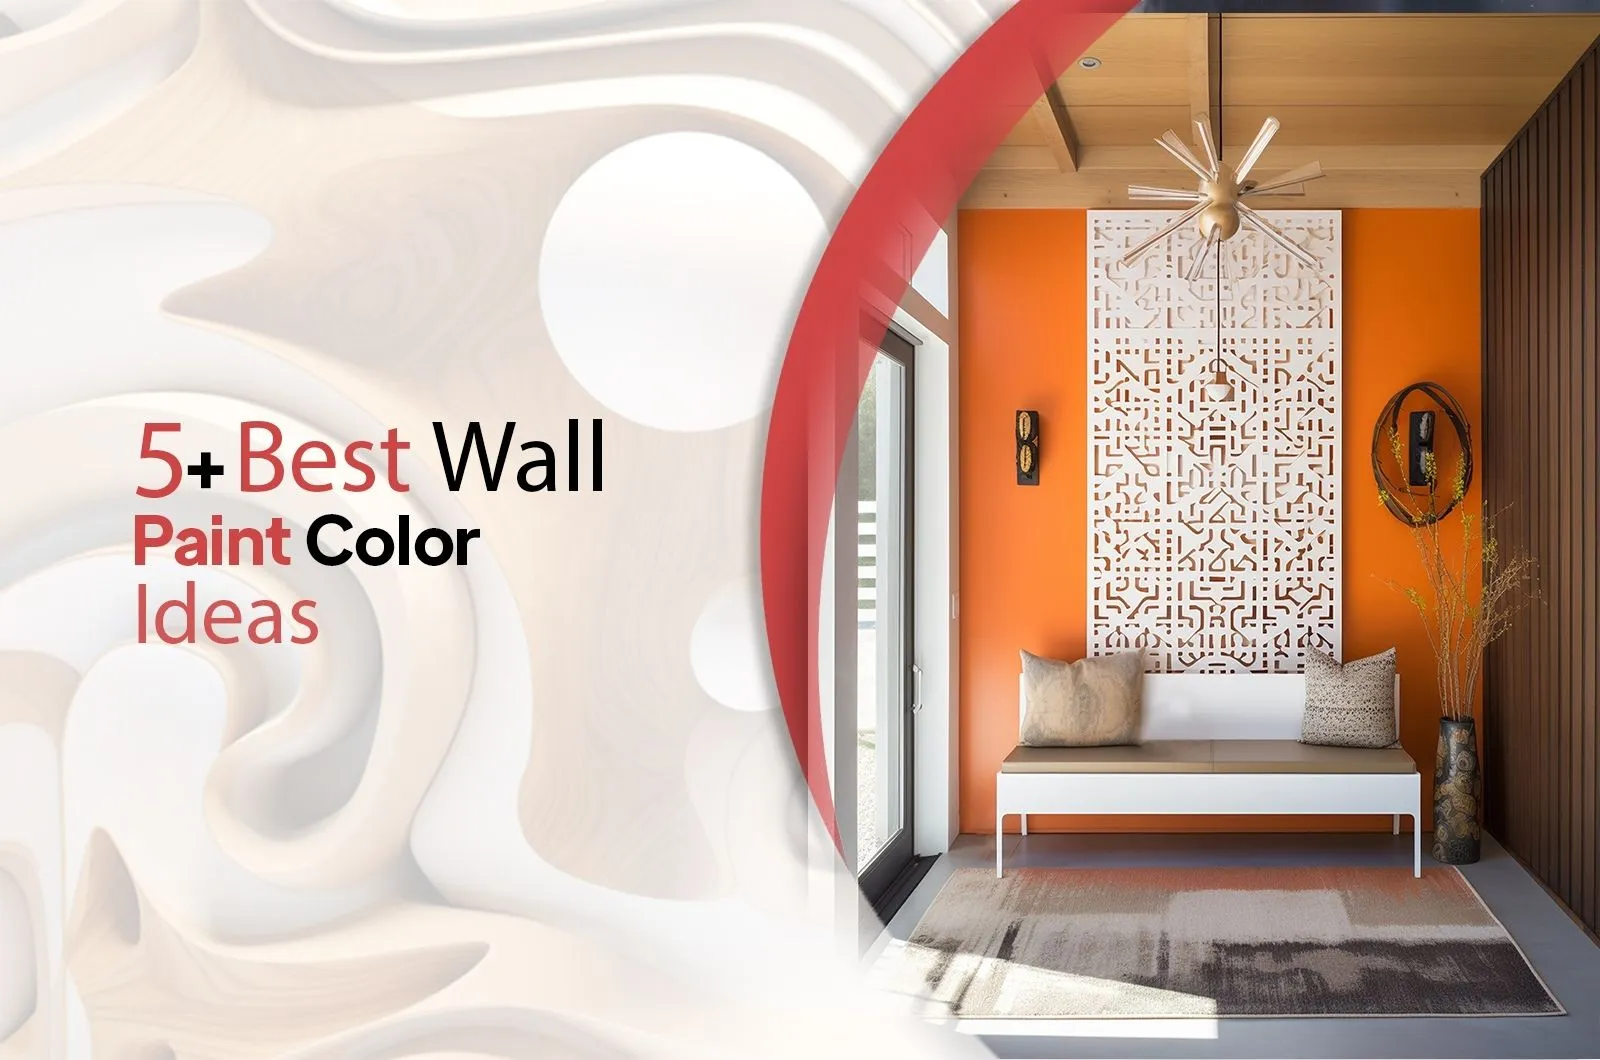 Wall Paint Color Ideas